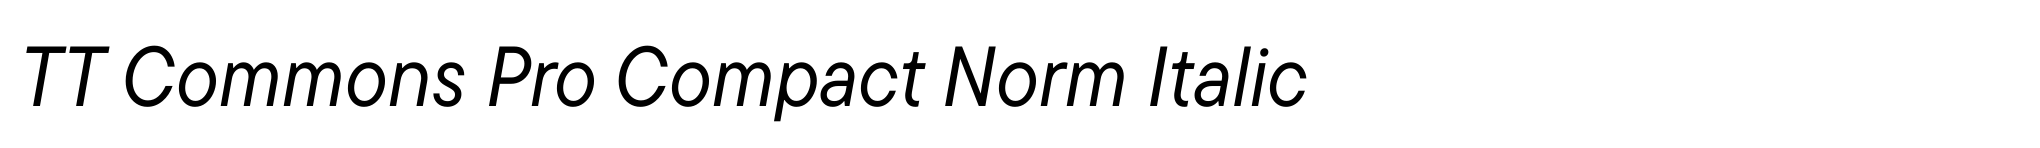 TT Commons Pro Compact Norm Italic image